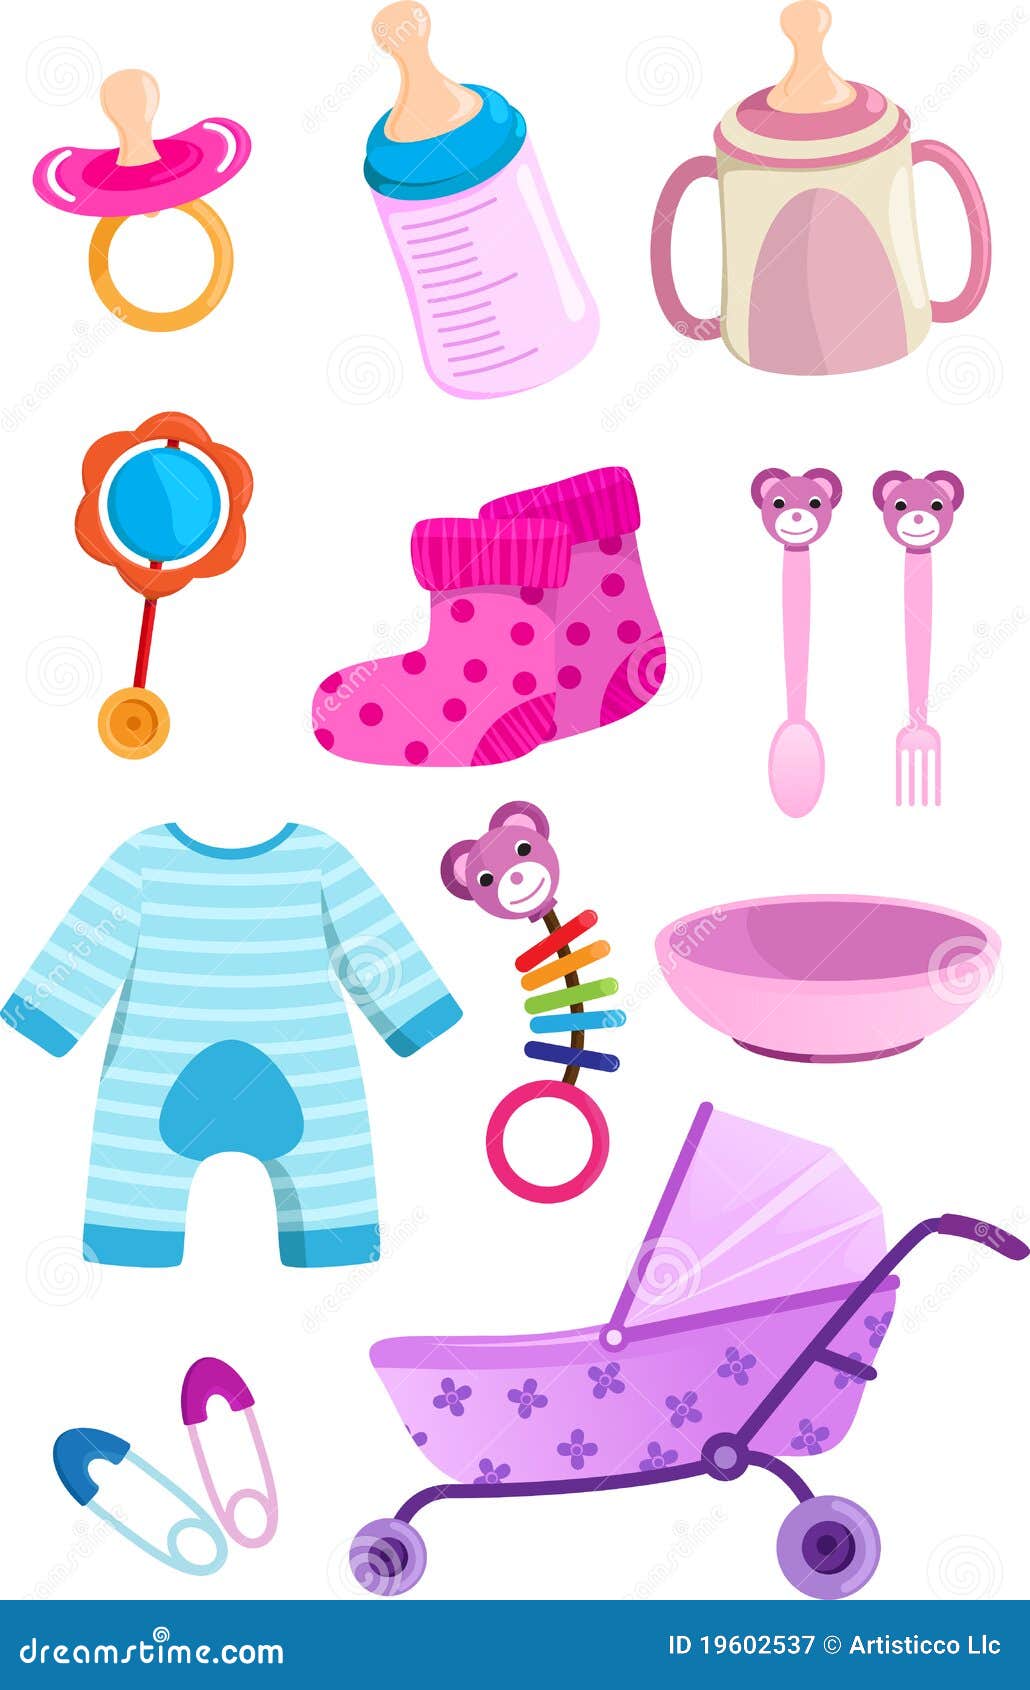 Baby Items Royalty Free Stock Photography - Image: 19602537